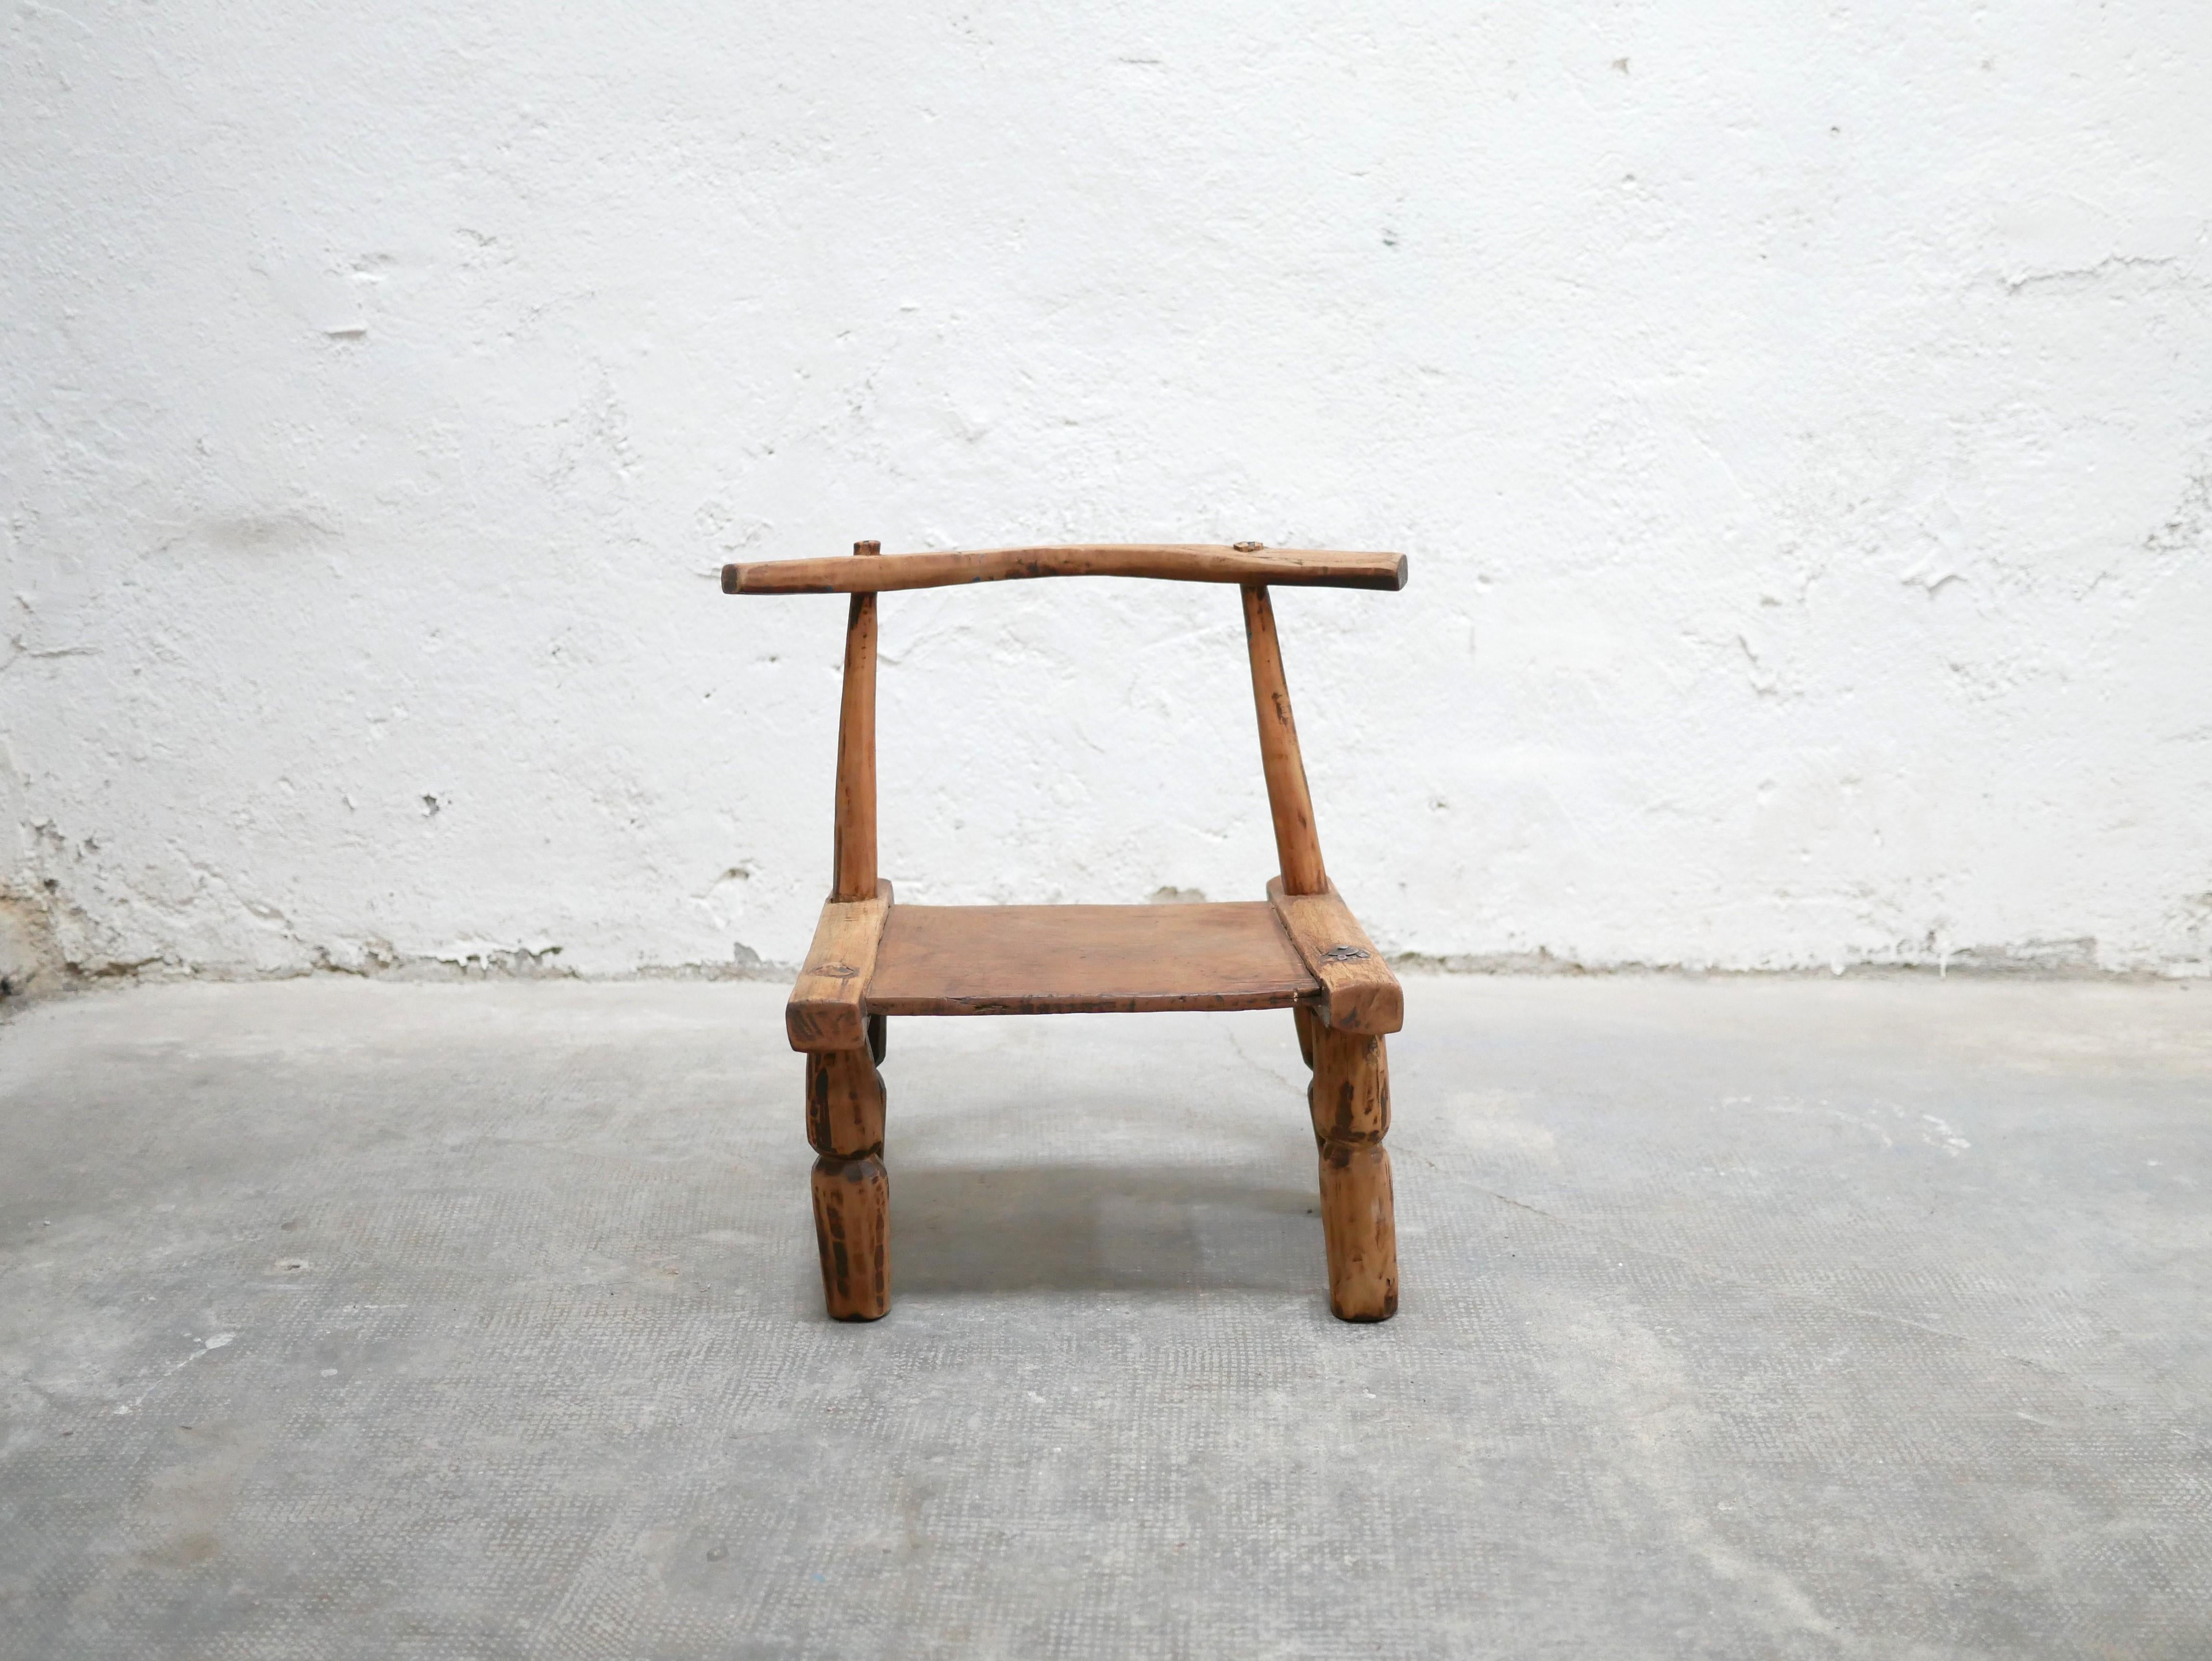 African brutalist wooden chair from the 60s.

Aesthetic and authentic, the small chair will be perfect in a refined, natural and modern decoration. Its raw material and simple lines give it a lot of character and elegance.
 
Good condition, some